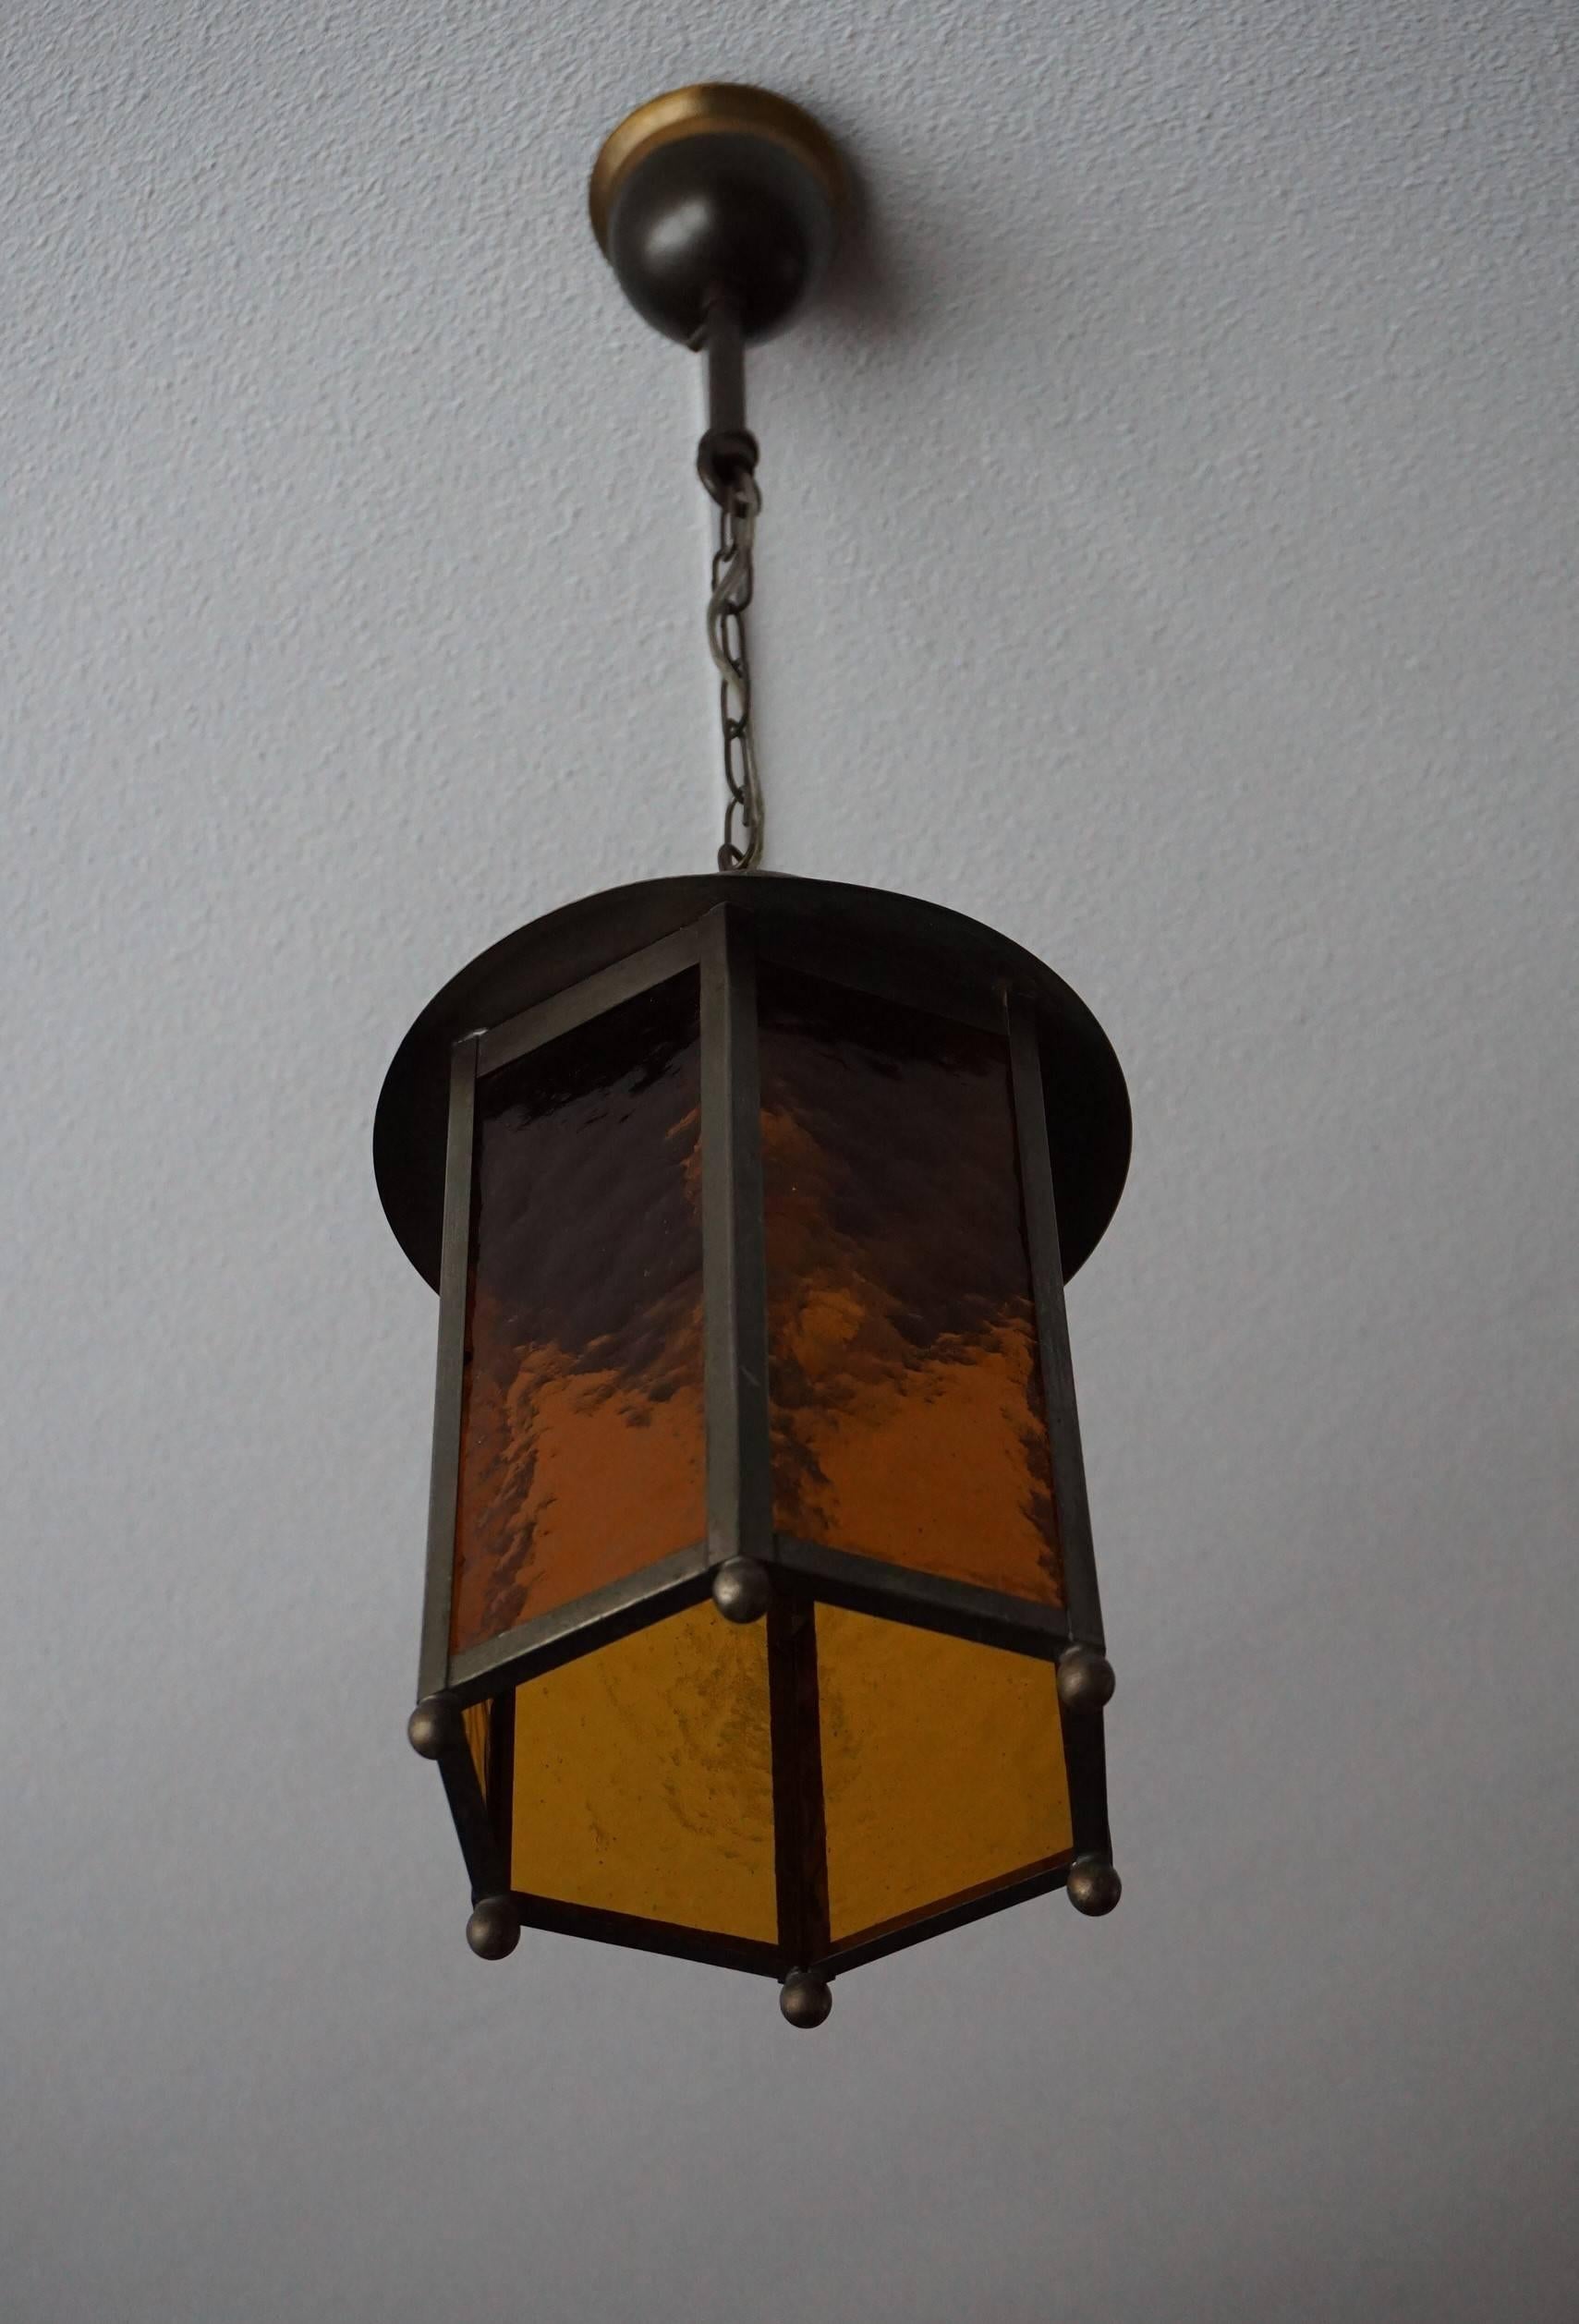 Perfect shape and condition, amber color hall ceiling lamp.

This beautiful Arts & Crafts light fixture could not be in a better condition and the warm light it radiates will bring the perfect atmosphere to your entrance or hallway. The brass frame